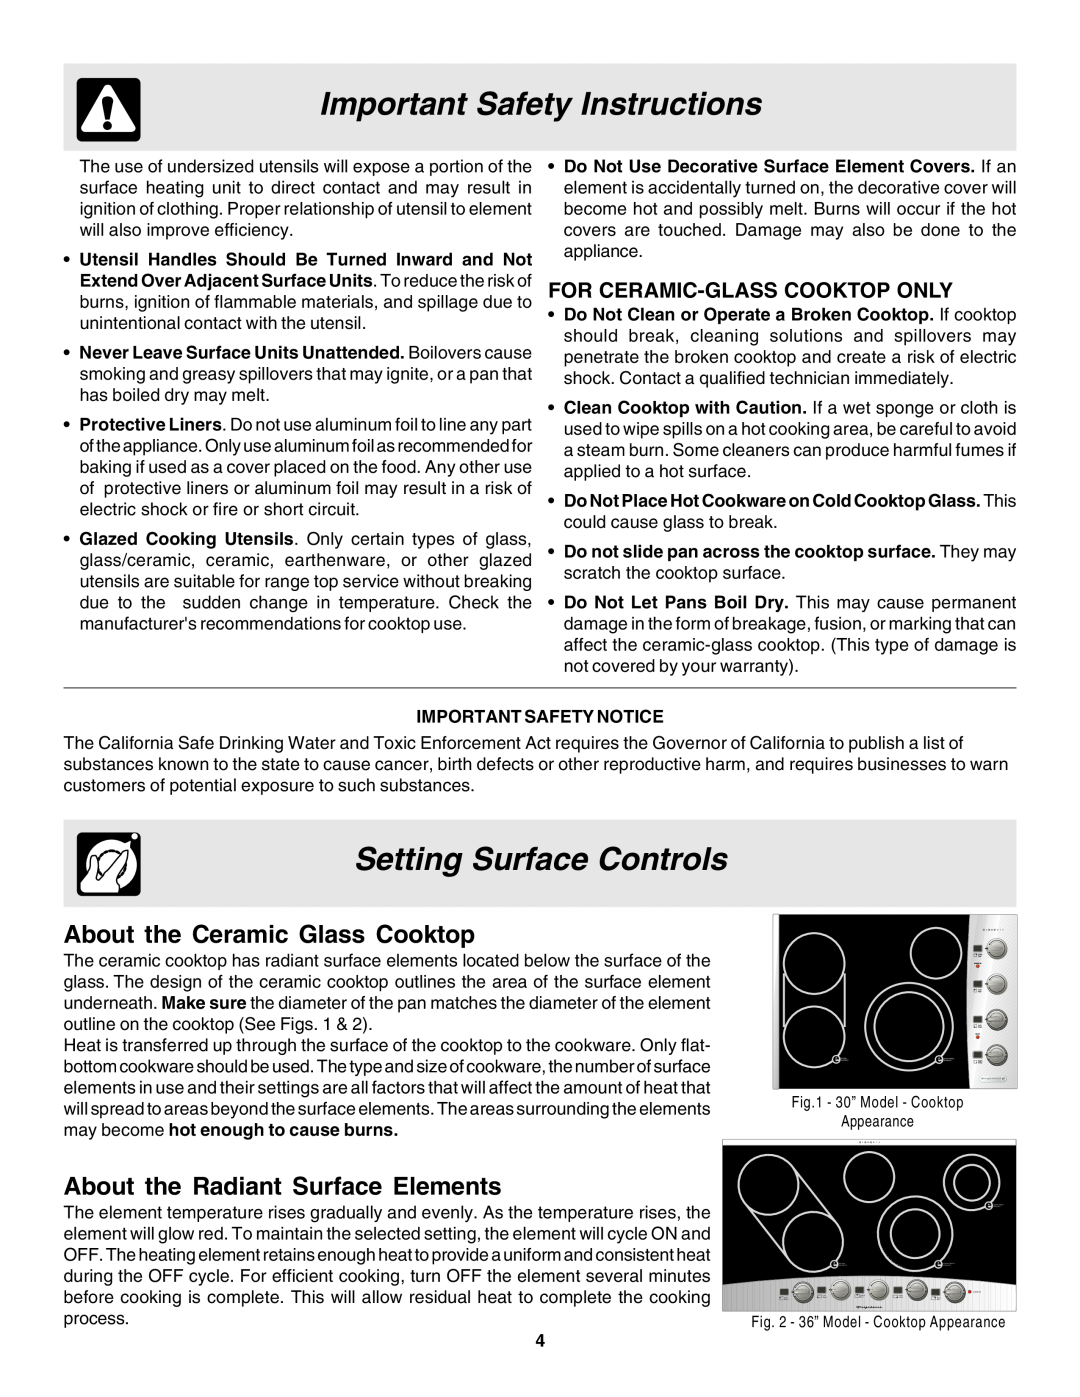 Frigidaire 318200633 warranty Setting Surface Controls, About the Ceramic Glass Cooktop, About the Radiant Surface Elements 